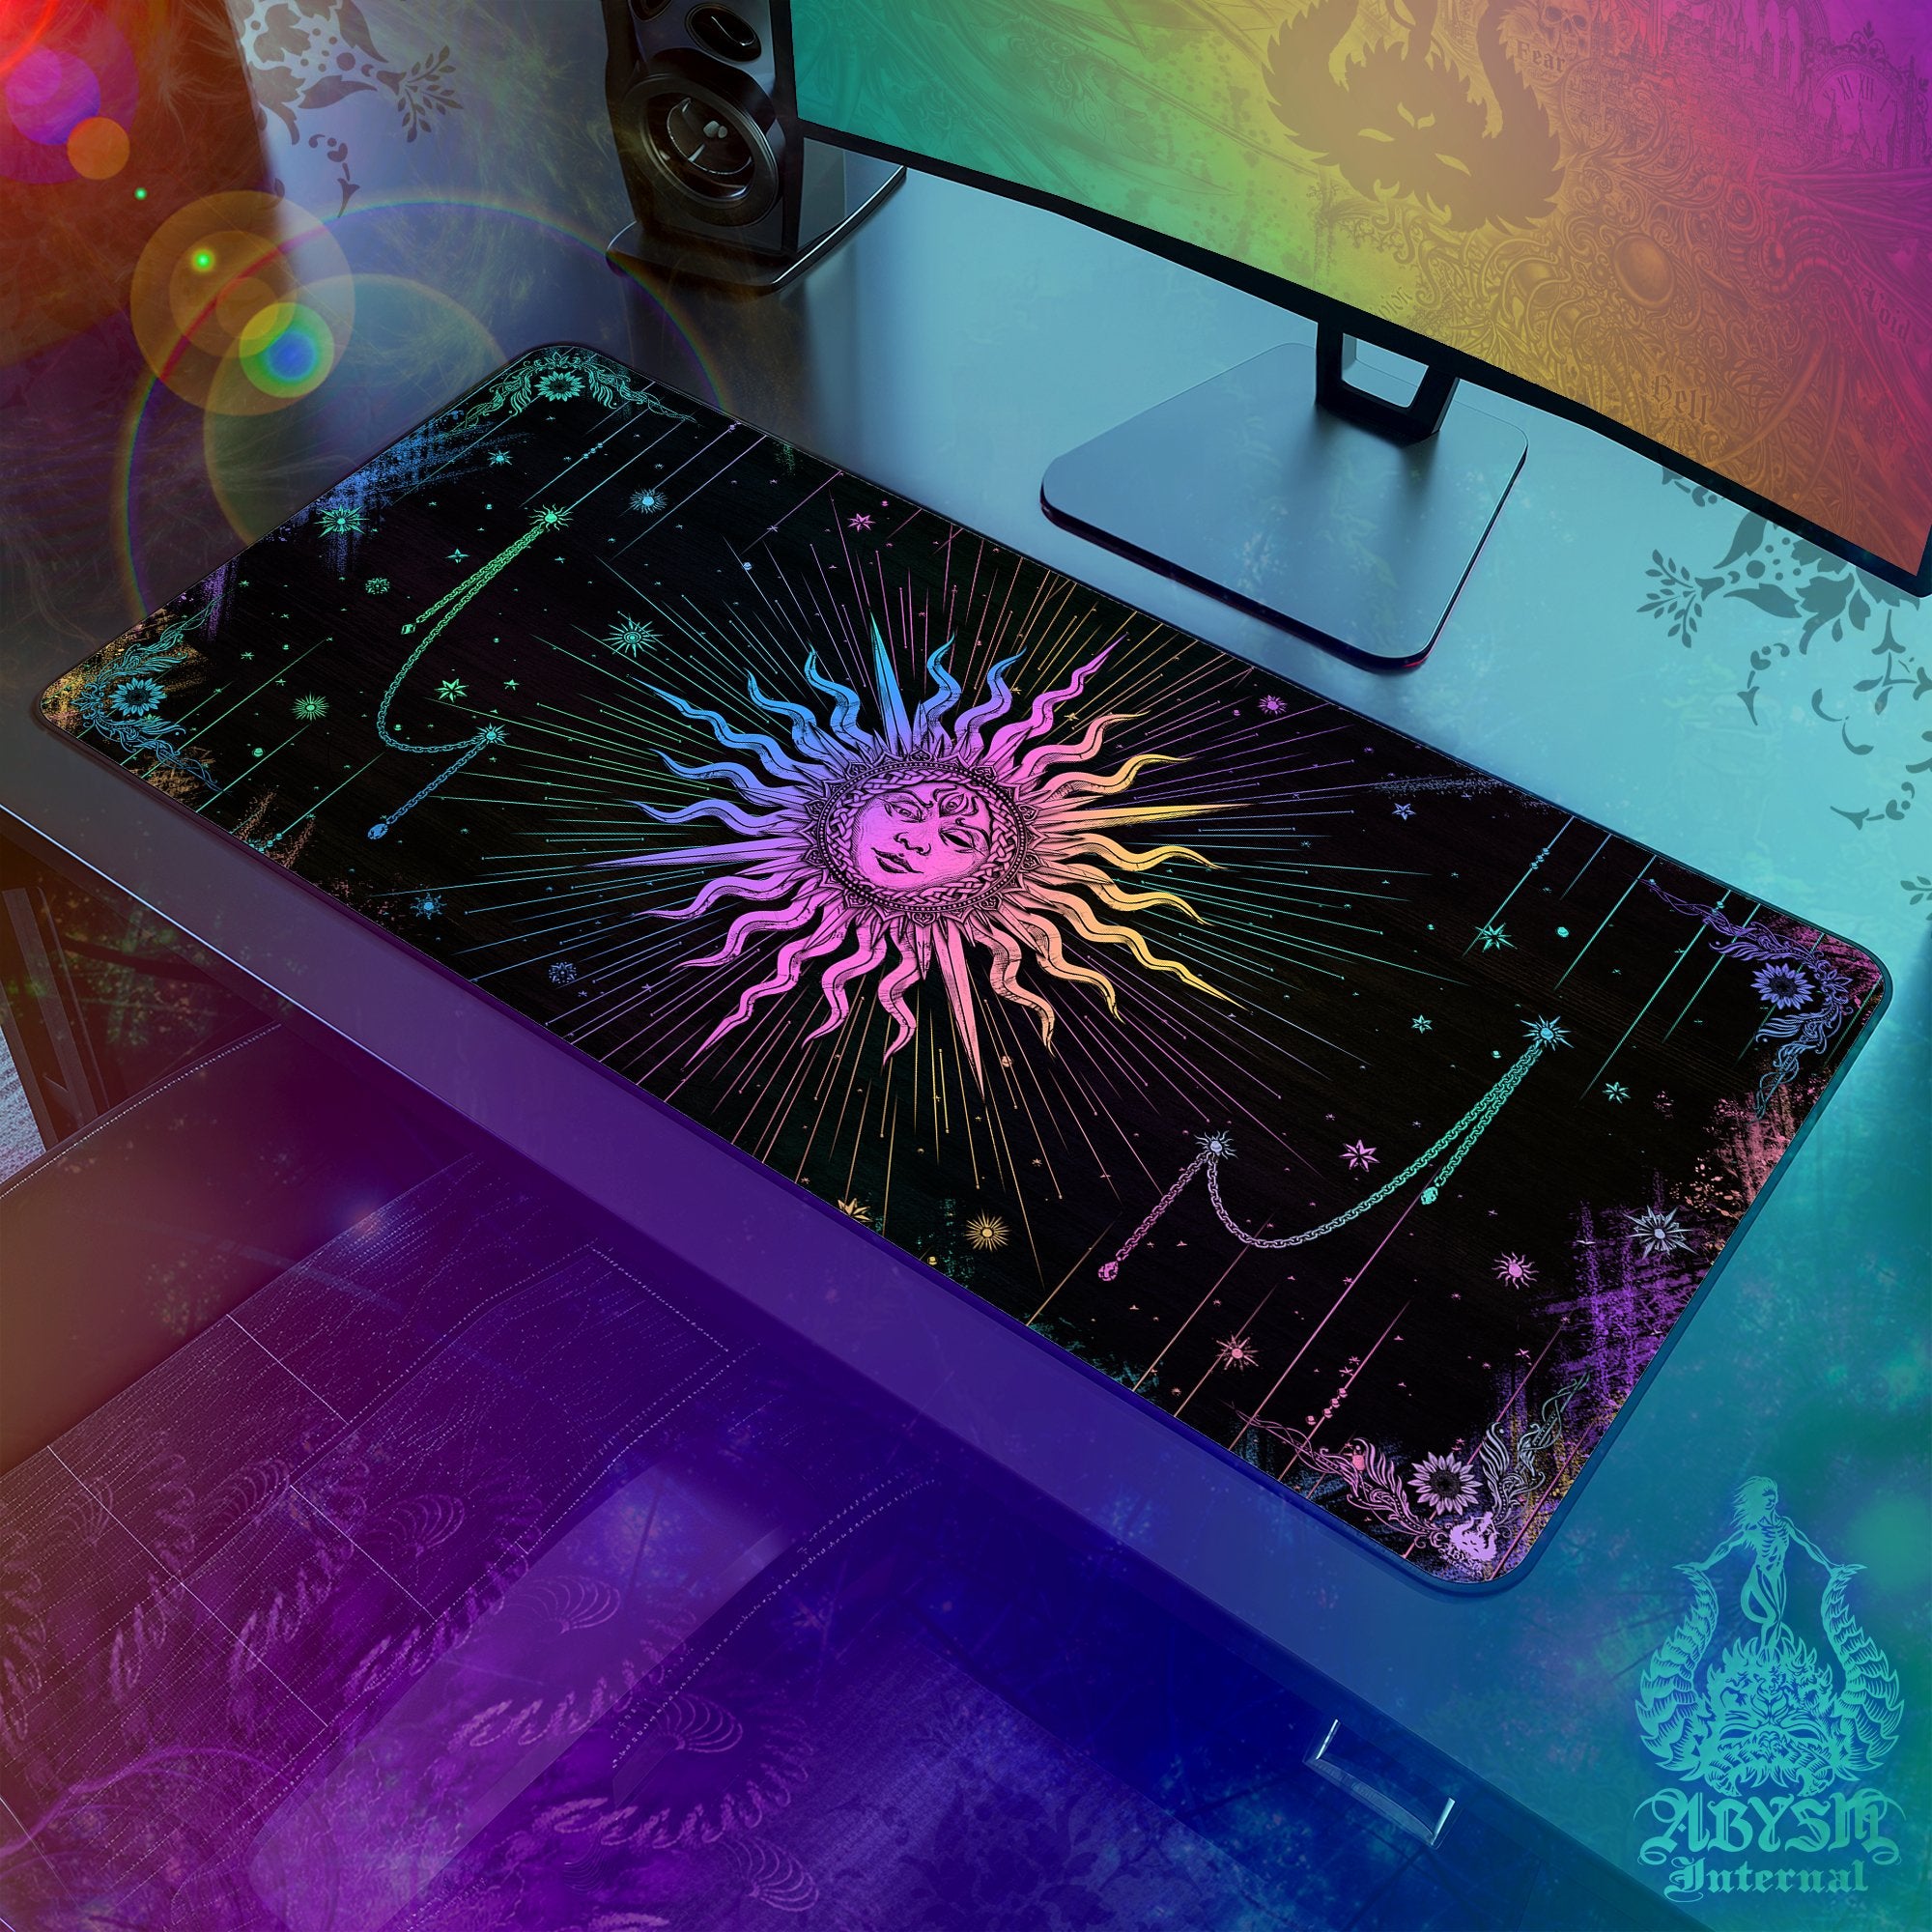 Pastel Sun Workpad, Tarot Arcana Desk Mat, Witch Gaming Mouse Pad, BBBBB Table Protector Cover, Dark Esoteric Art Print - Abysm Internal